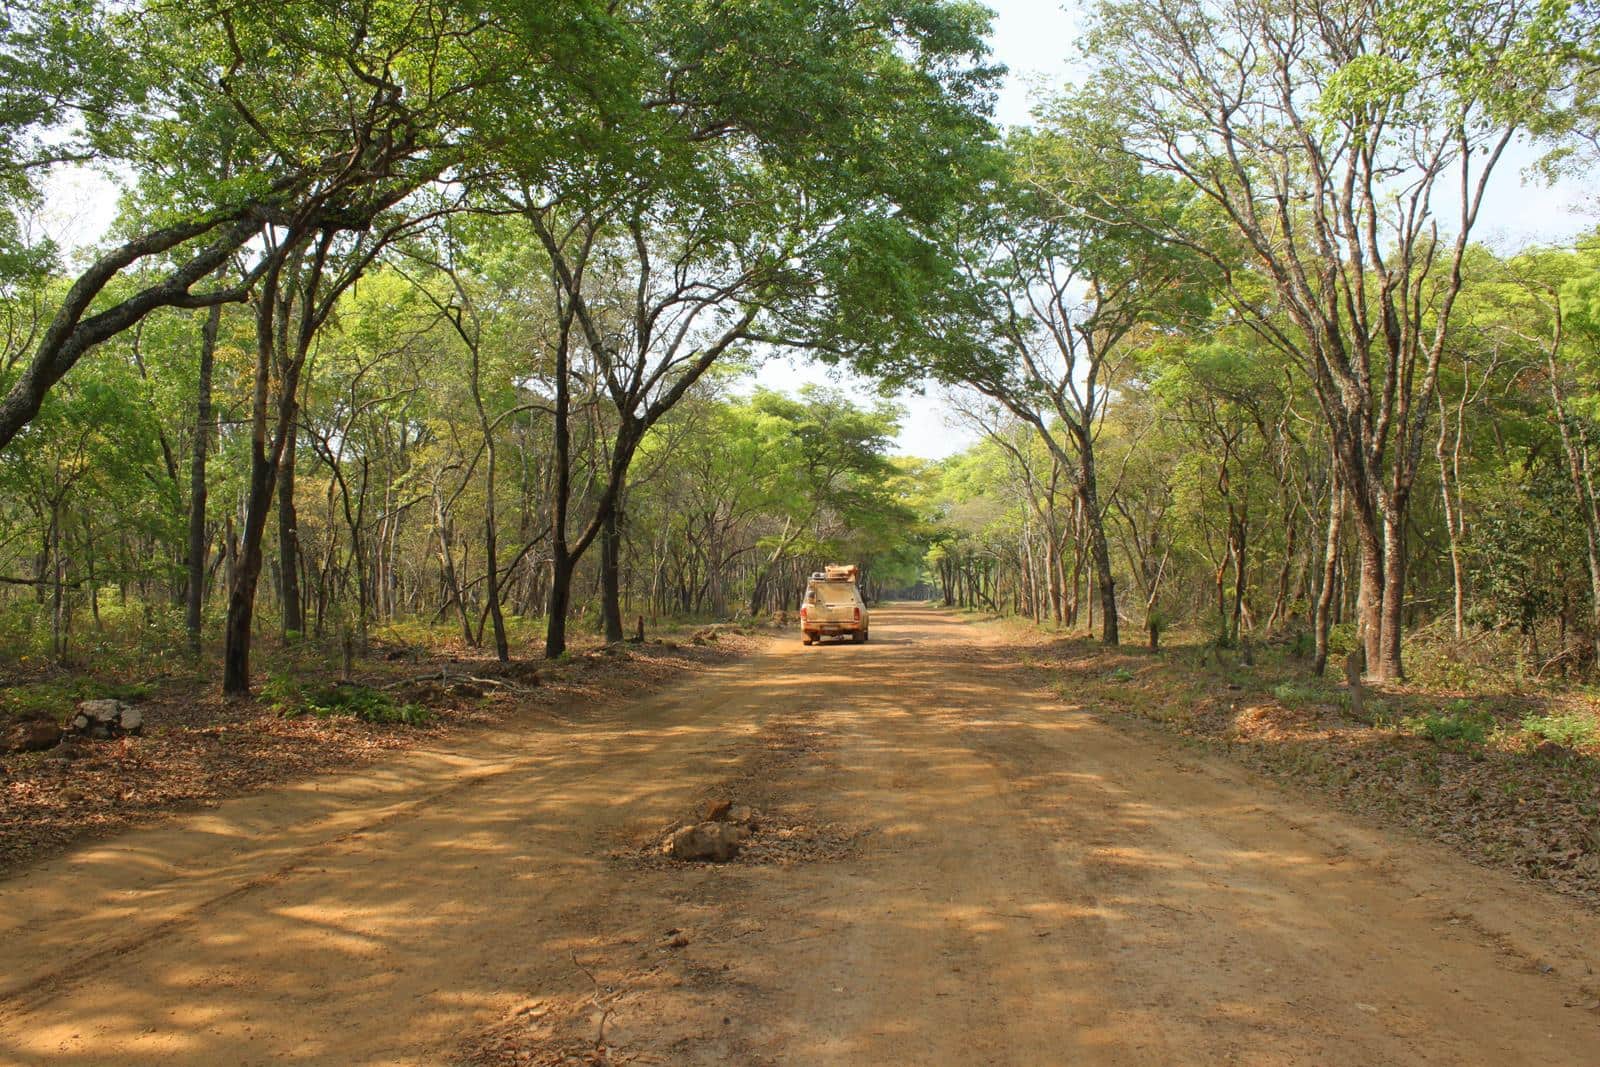 Passing through pristine African forest. 